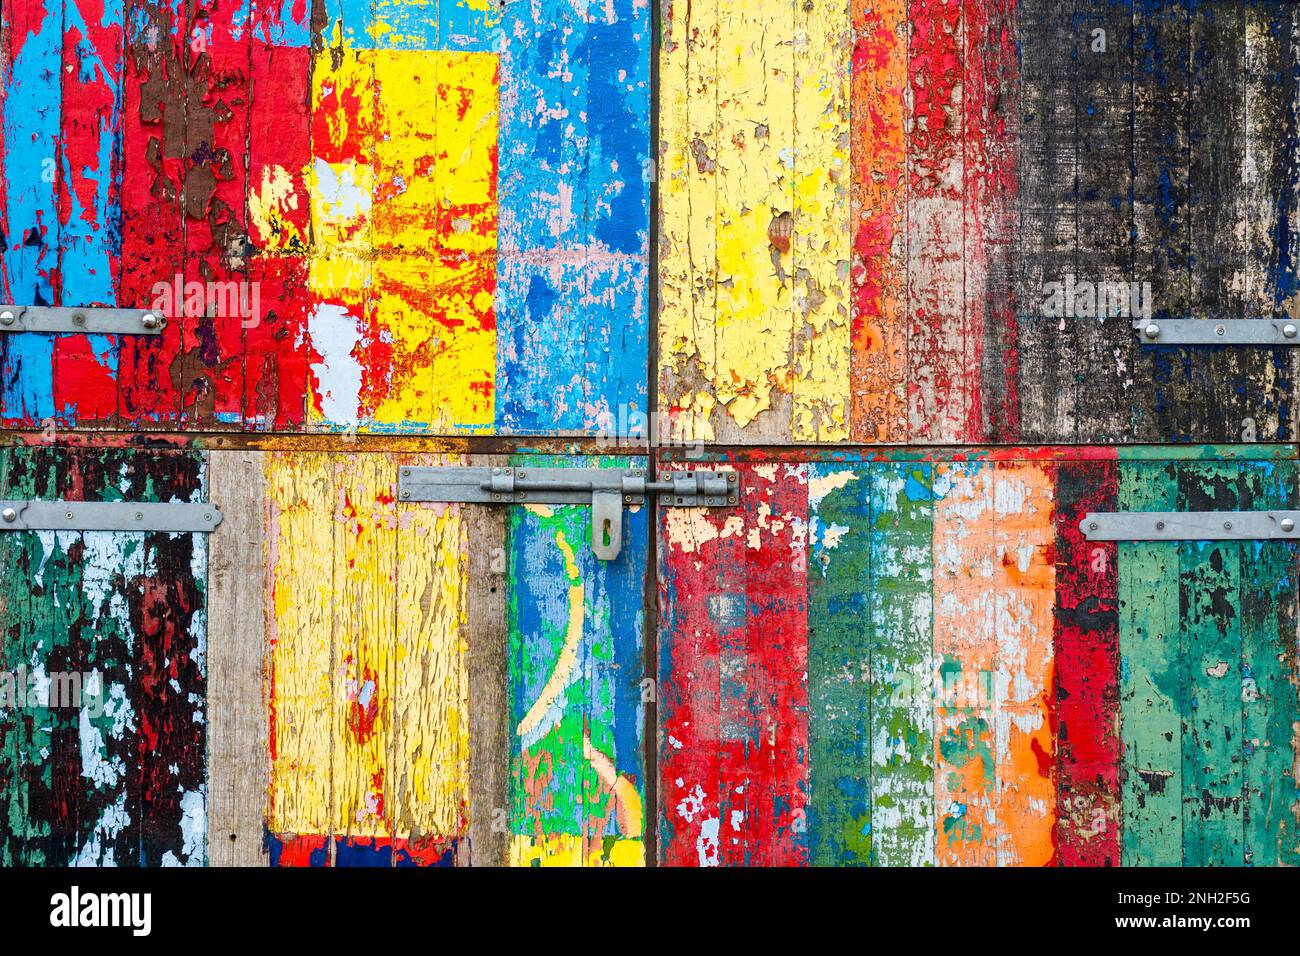 Colourfully painted garage or shed door with texture and decay of old paint. Stock Photo